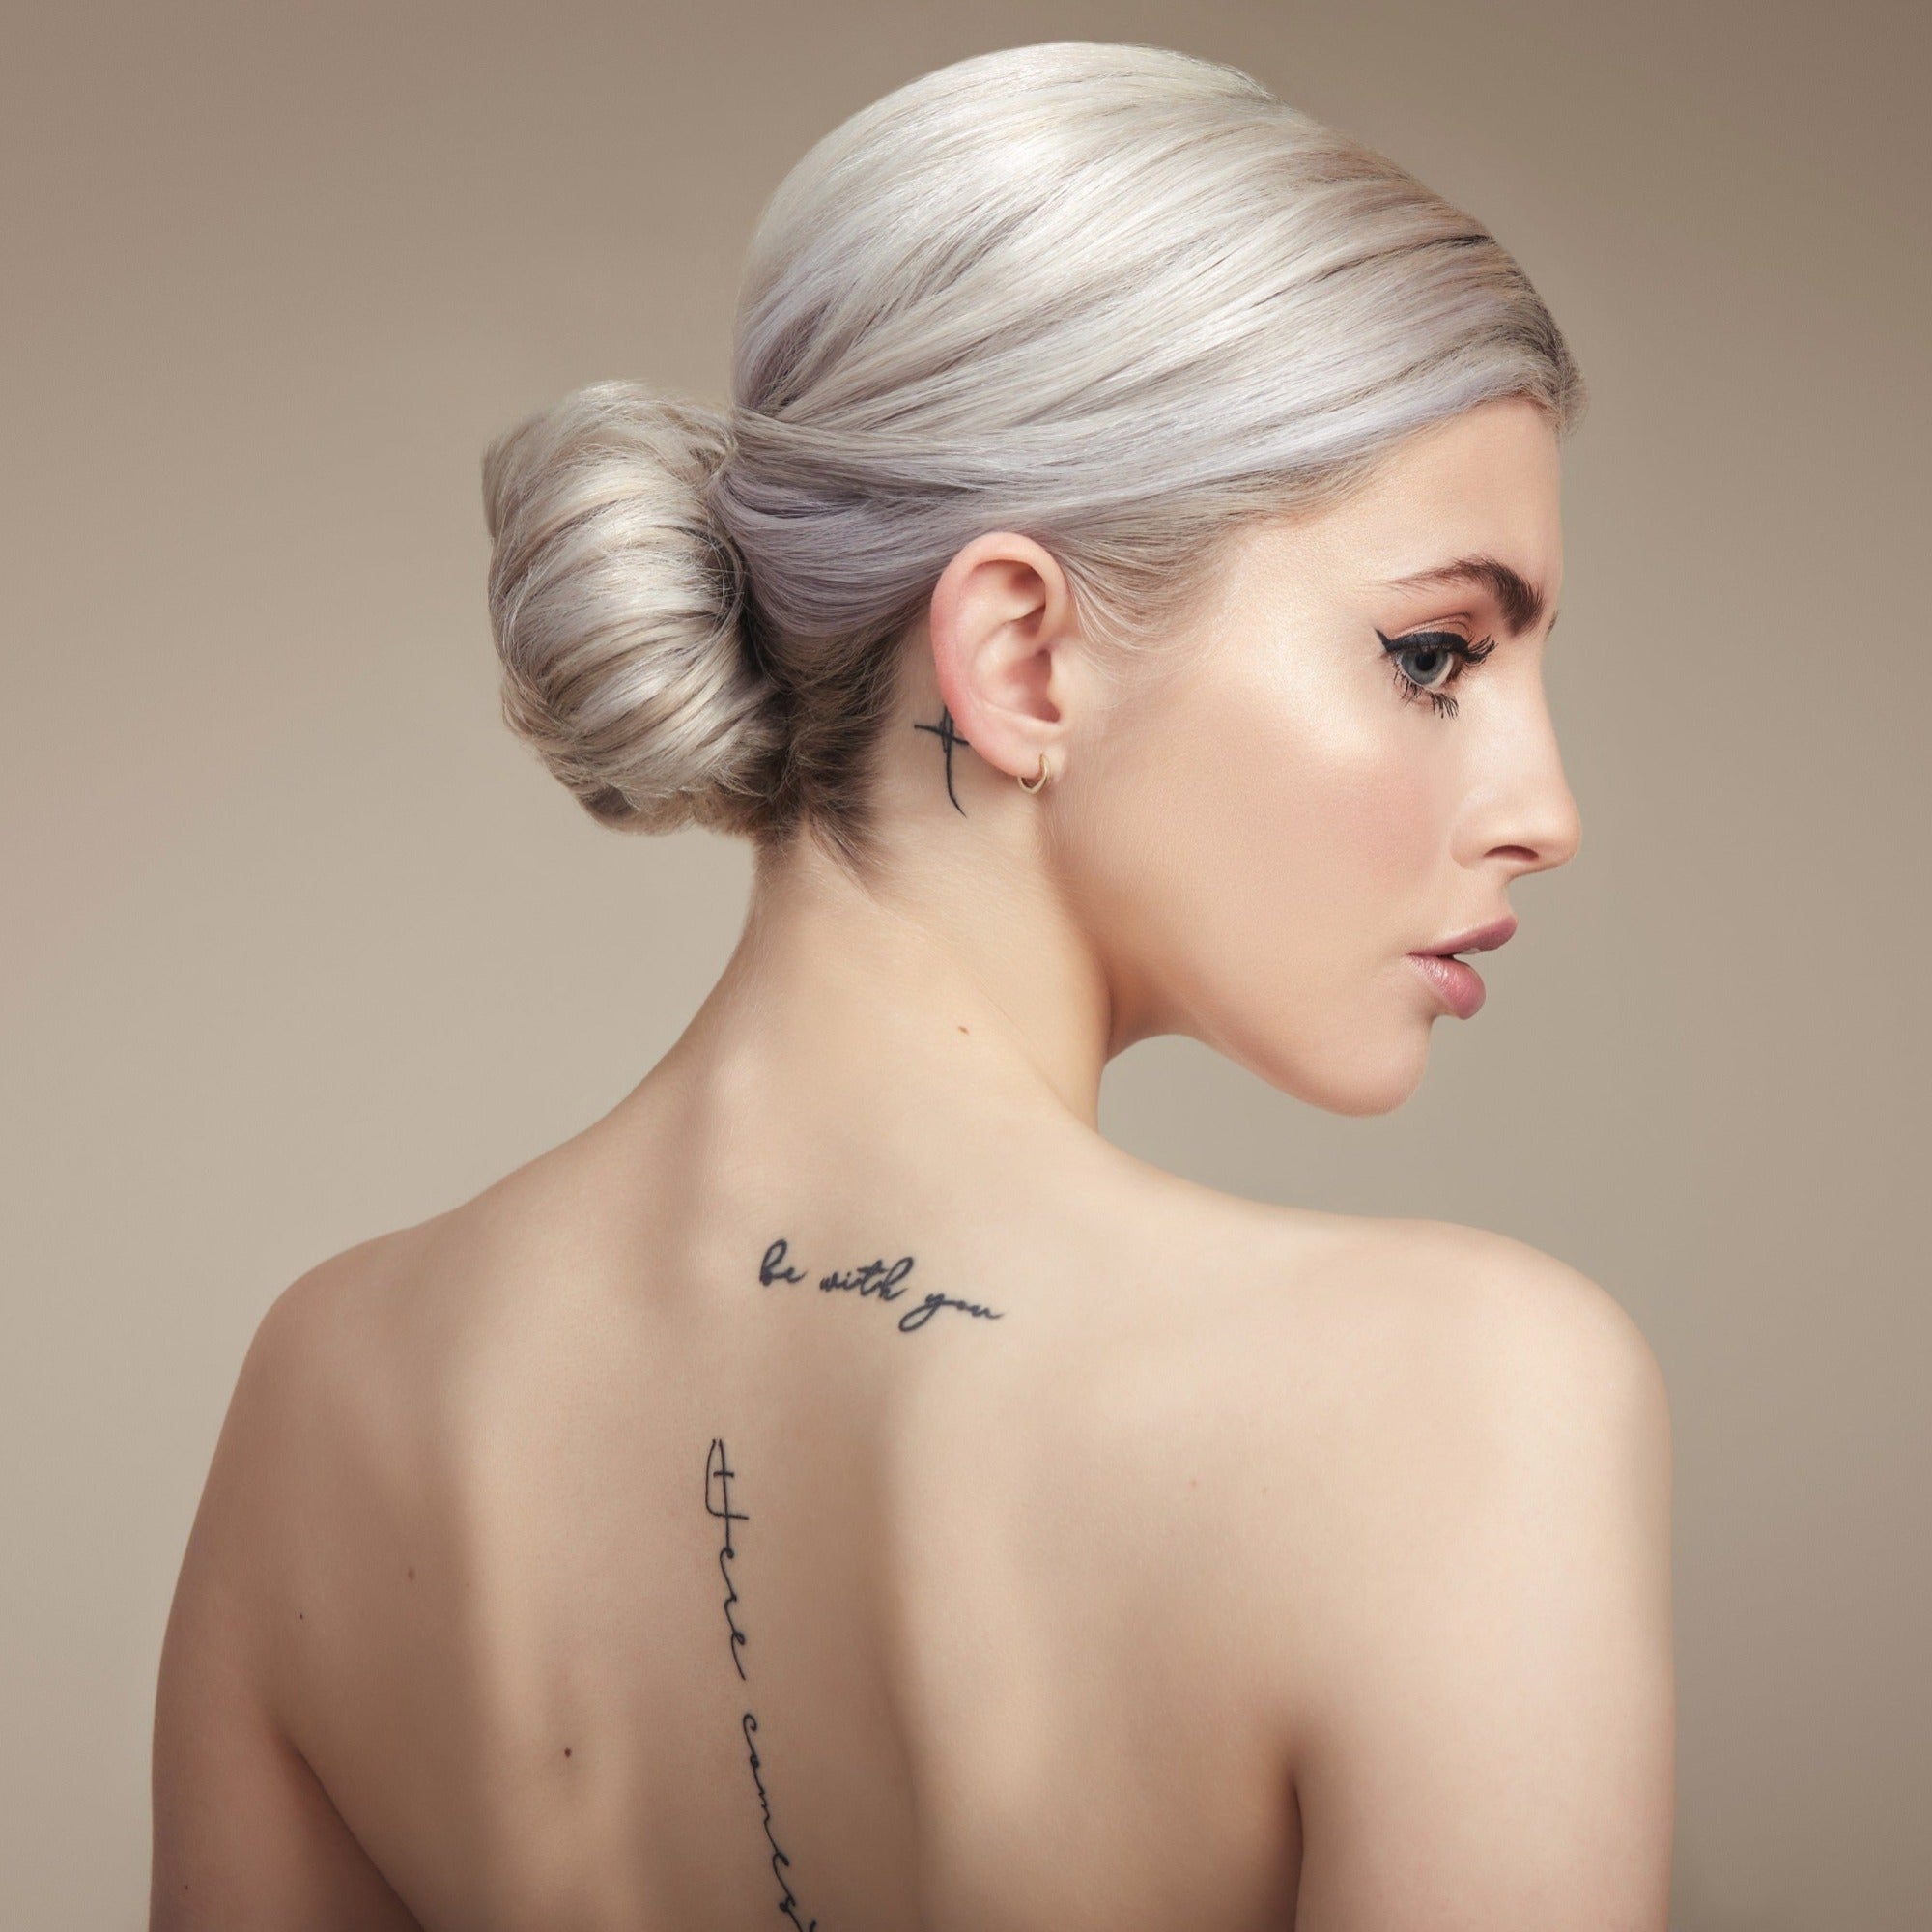 Female model with her back to the camera. Her platinum blonde hair is in a neat low bun, back is bare and she has tattoos down her spine 